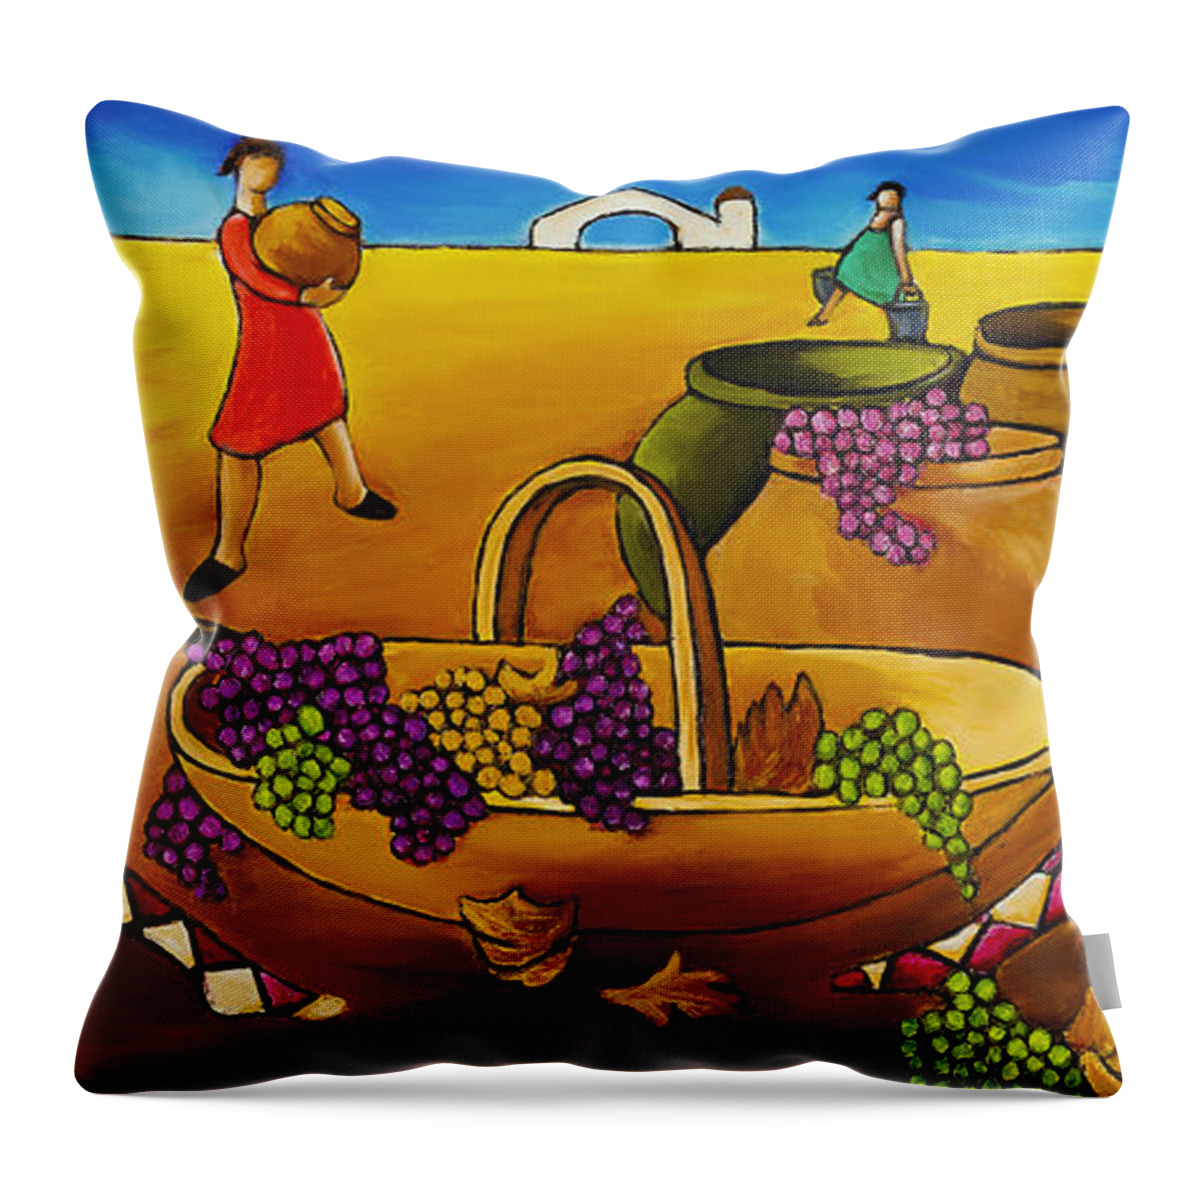 Women With Mandolins Throw Pillow featuring the painting Two Women With Mandolins by William Cain